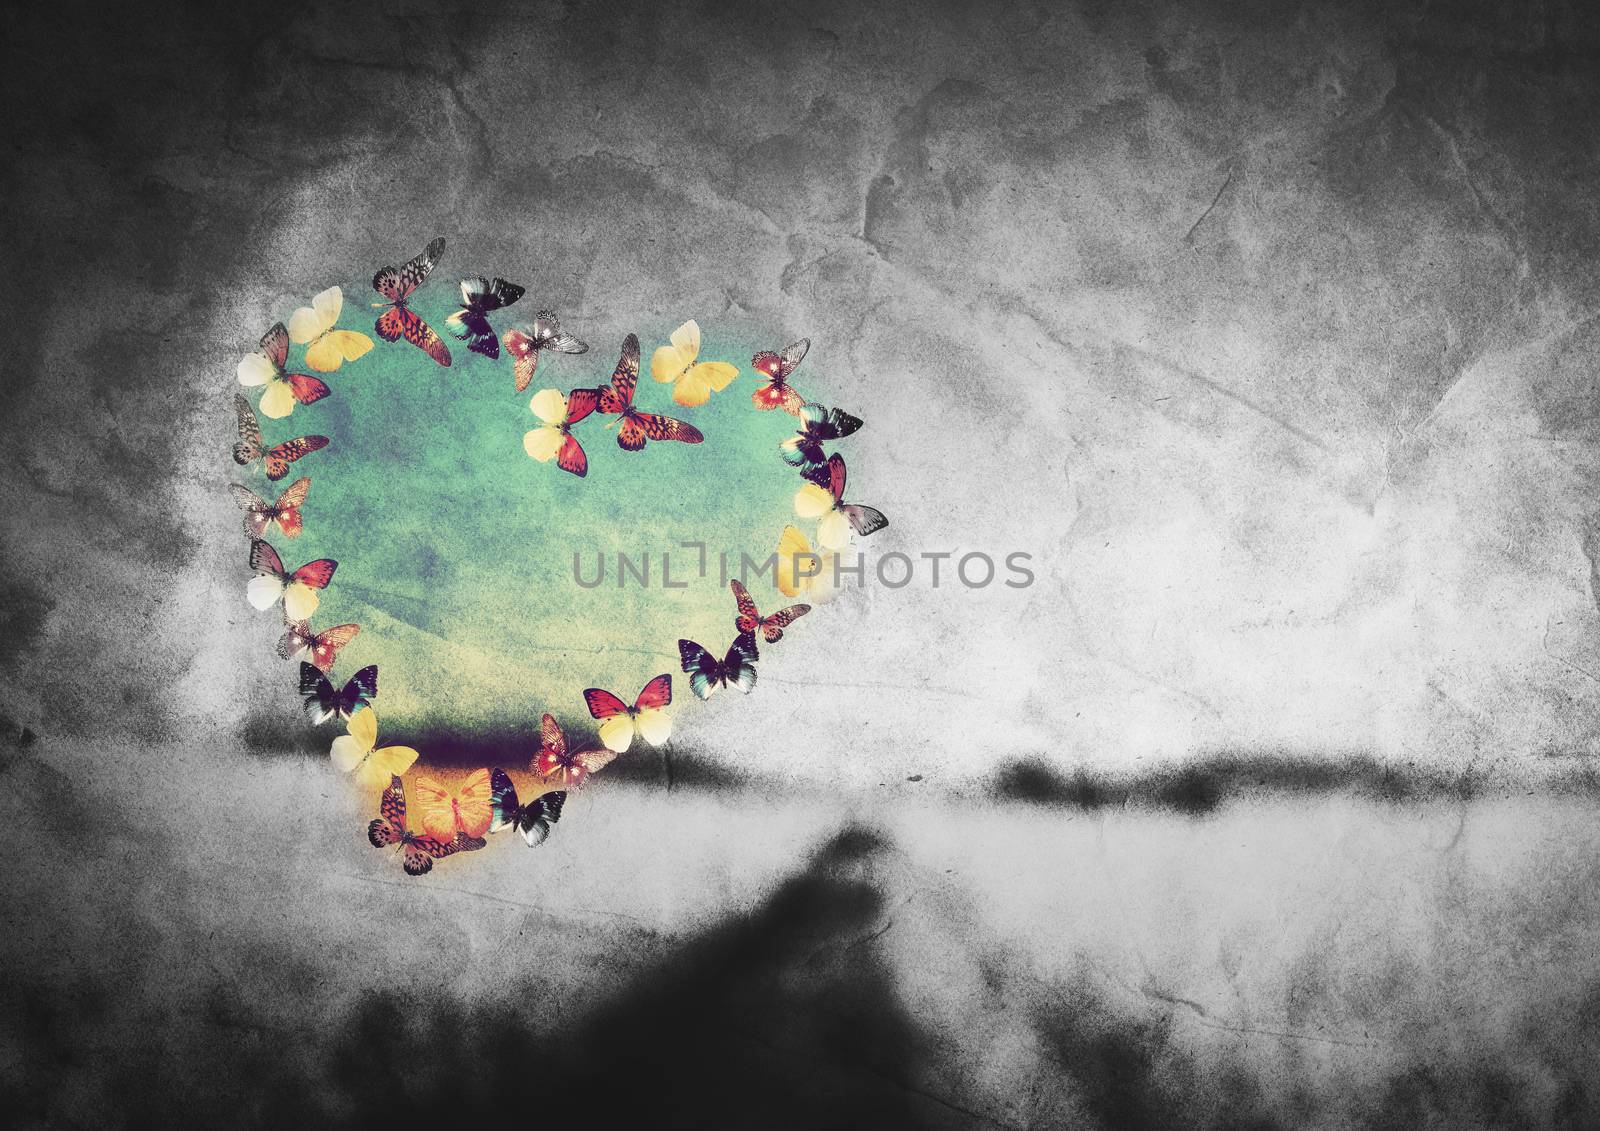 Heart shape made of colorful butterflies on black and white field vintage background. Love, hope concept.